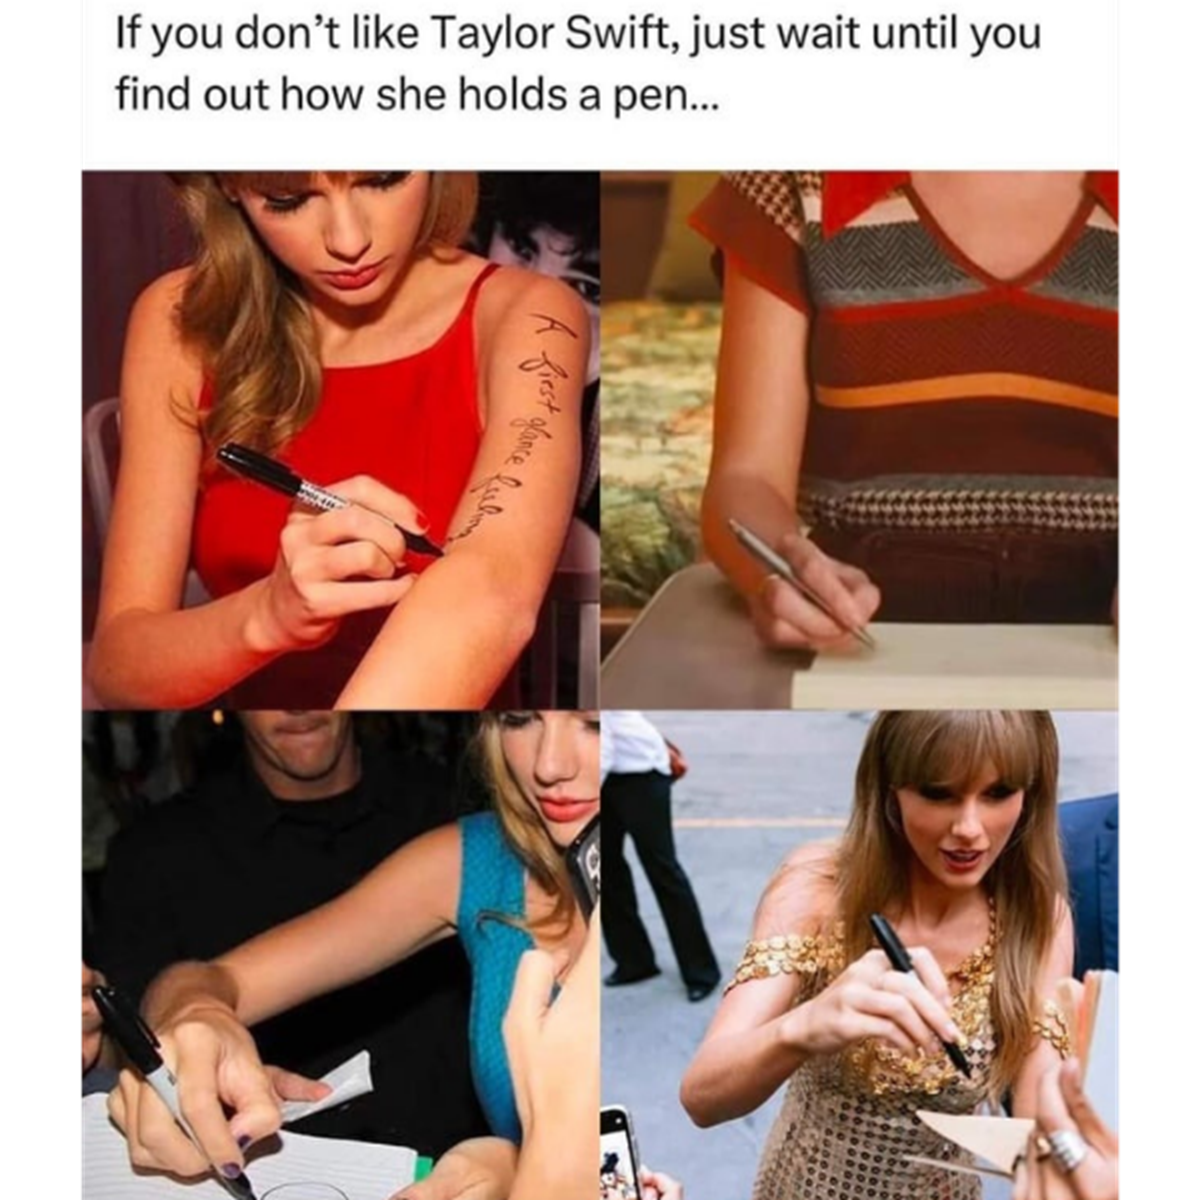 girl - If you don't Taylor Swift, just wait until you find out how she holds a pen... first oface lub